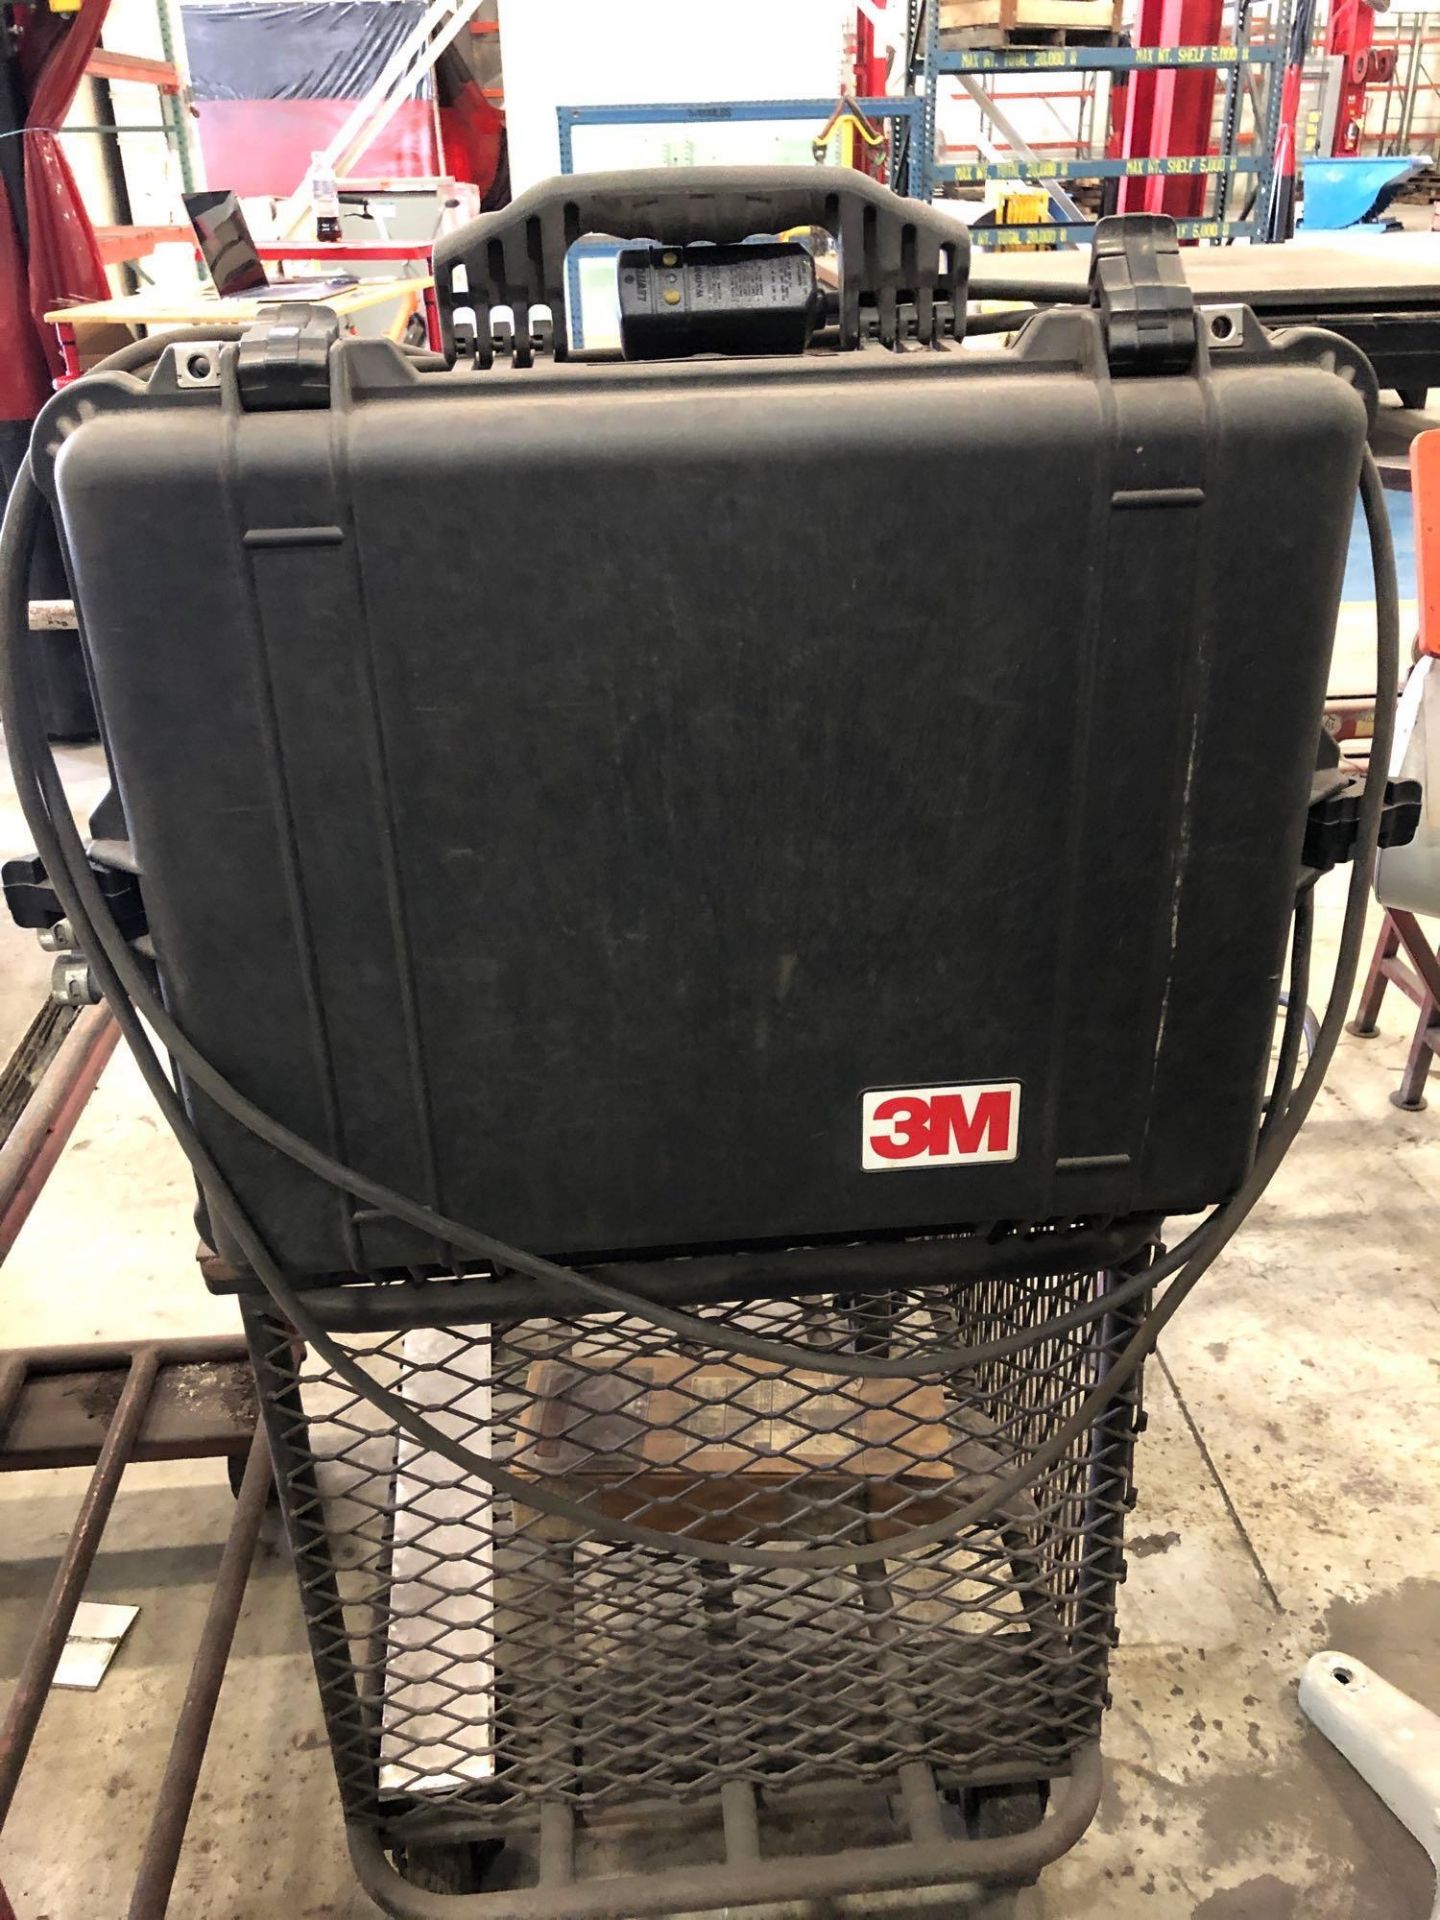 Steel Roll Around Cart w/ 3M Model: 5700 Co Monitor Air Purification System - Image 7 of 28